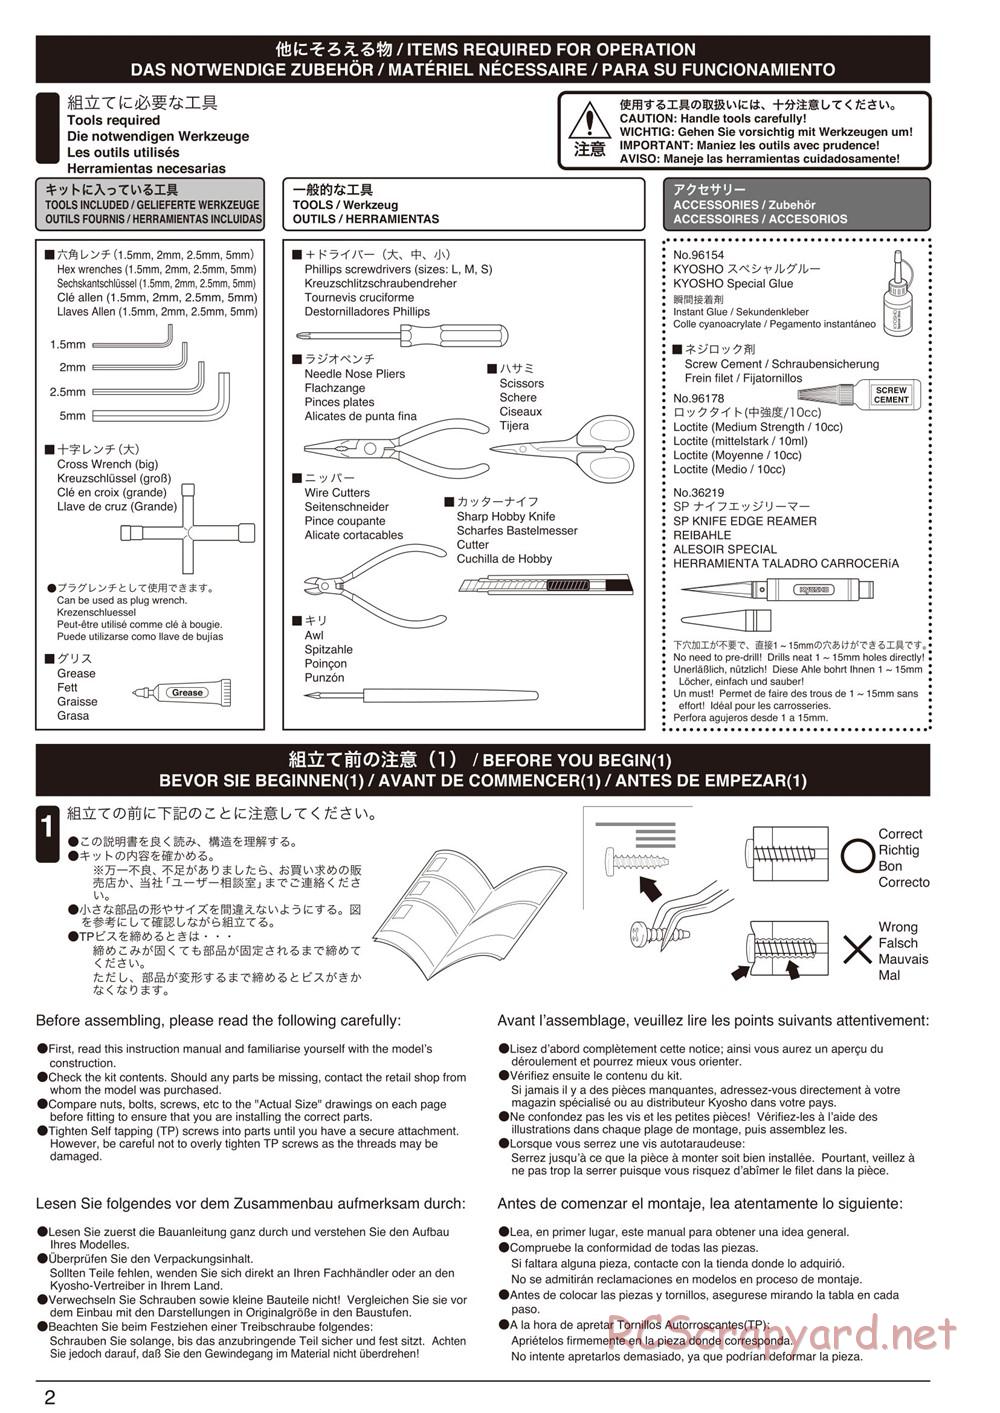 Kyosho - DRX - Manual - Page 2